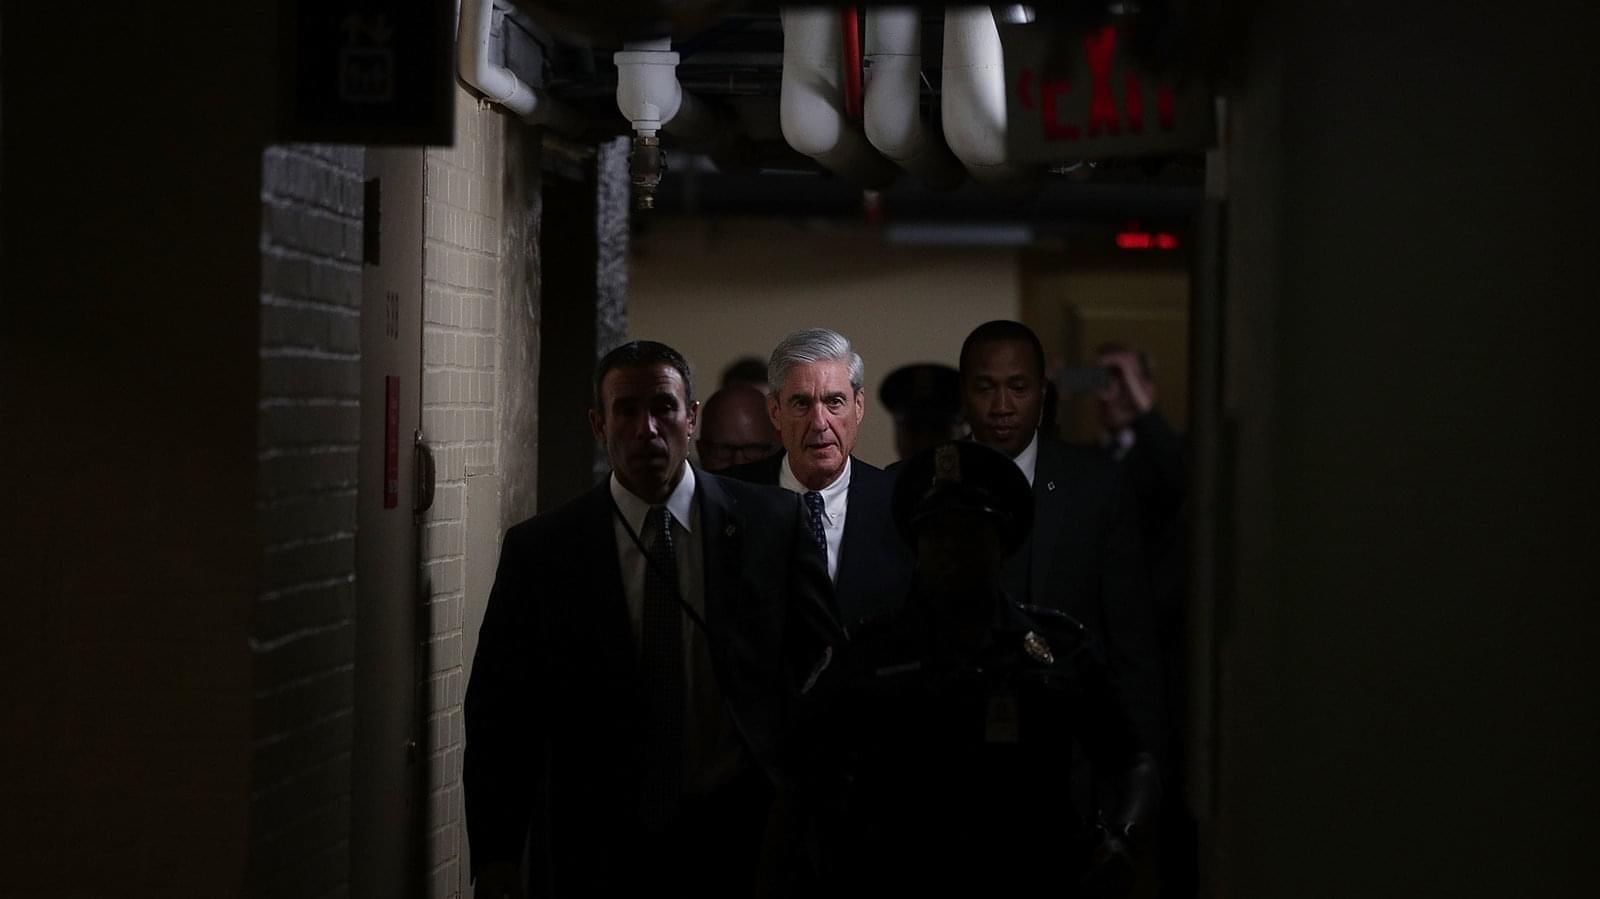 Special counsel Robert Mueller (C) leaves after a closed meeting with members of the Senate Judiciary Committee on June 21, 2017, at the Capitol in Washington, D.C. 